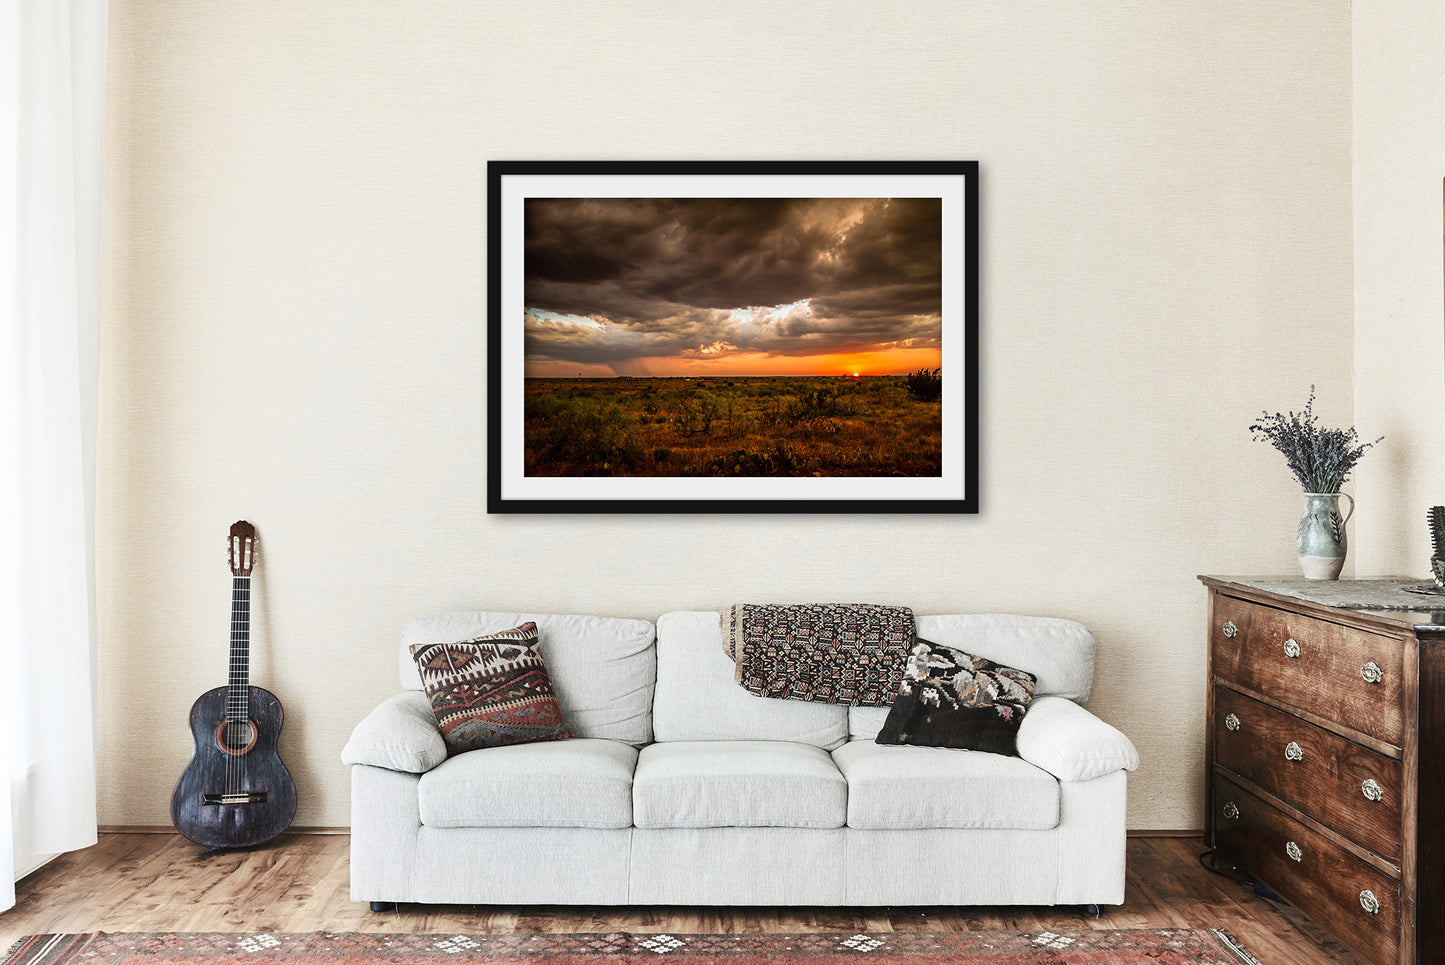 Framed and Matted Print - Picture of Mesquite Bushes and Cactus at Sunset on Stormy Evening in West Texas Landscape Wall Art Western Decor